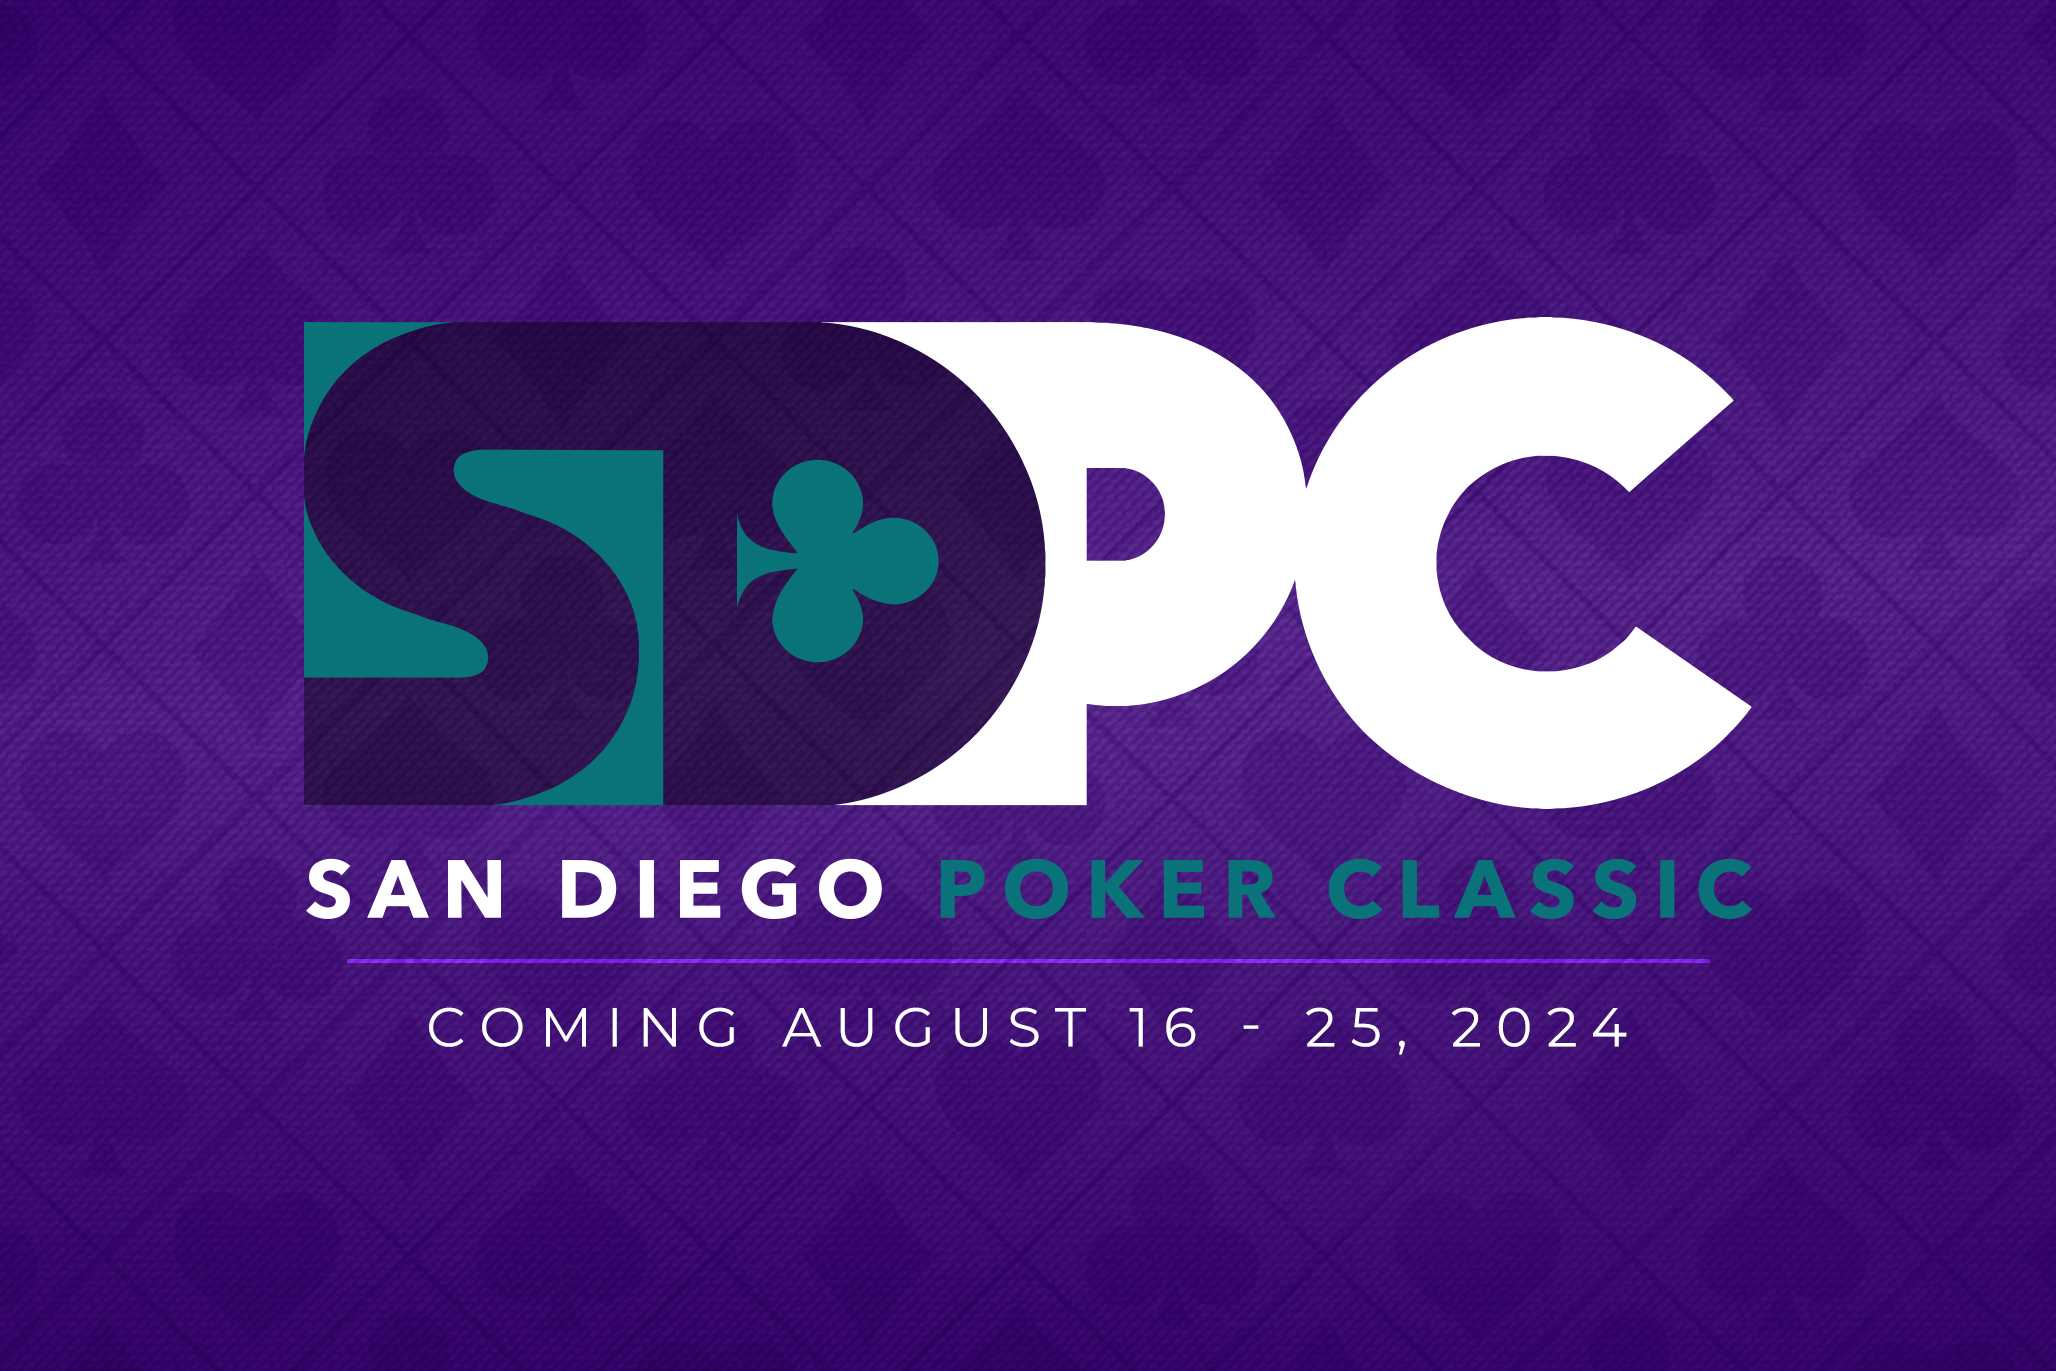 SDPC San Diego Poker Classic Coming August 16-25, 2024